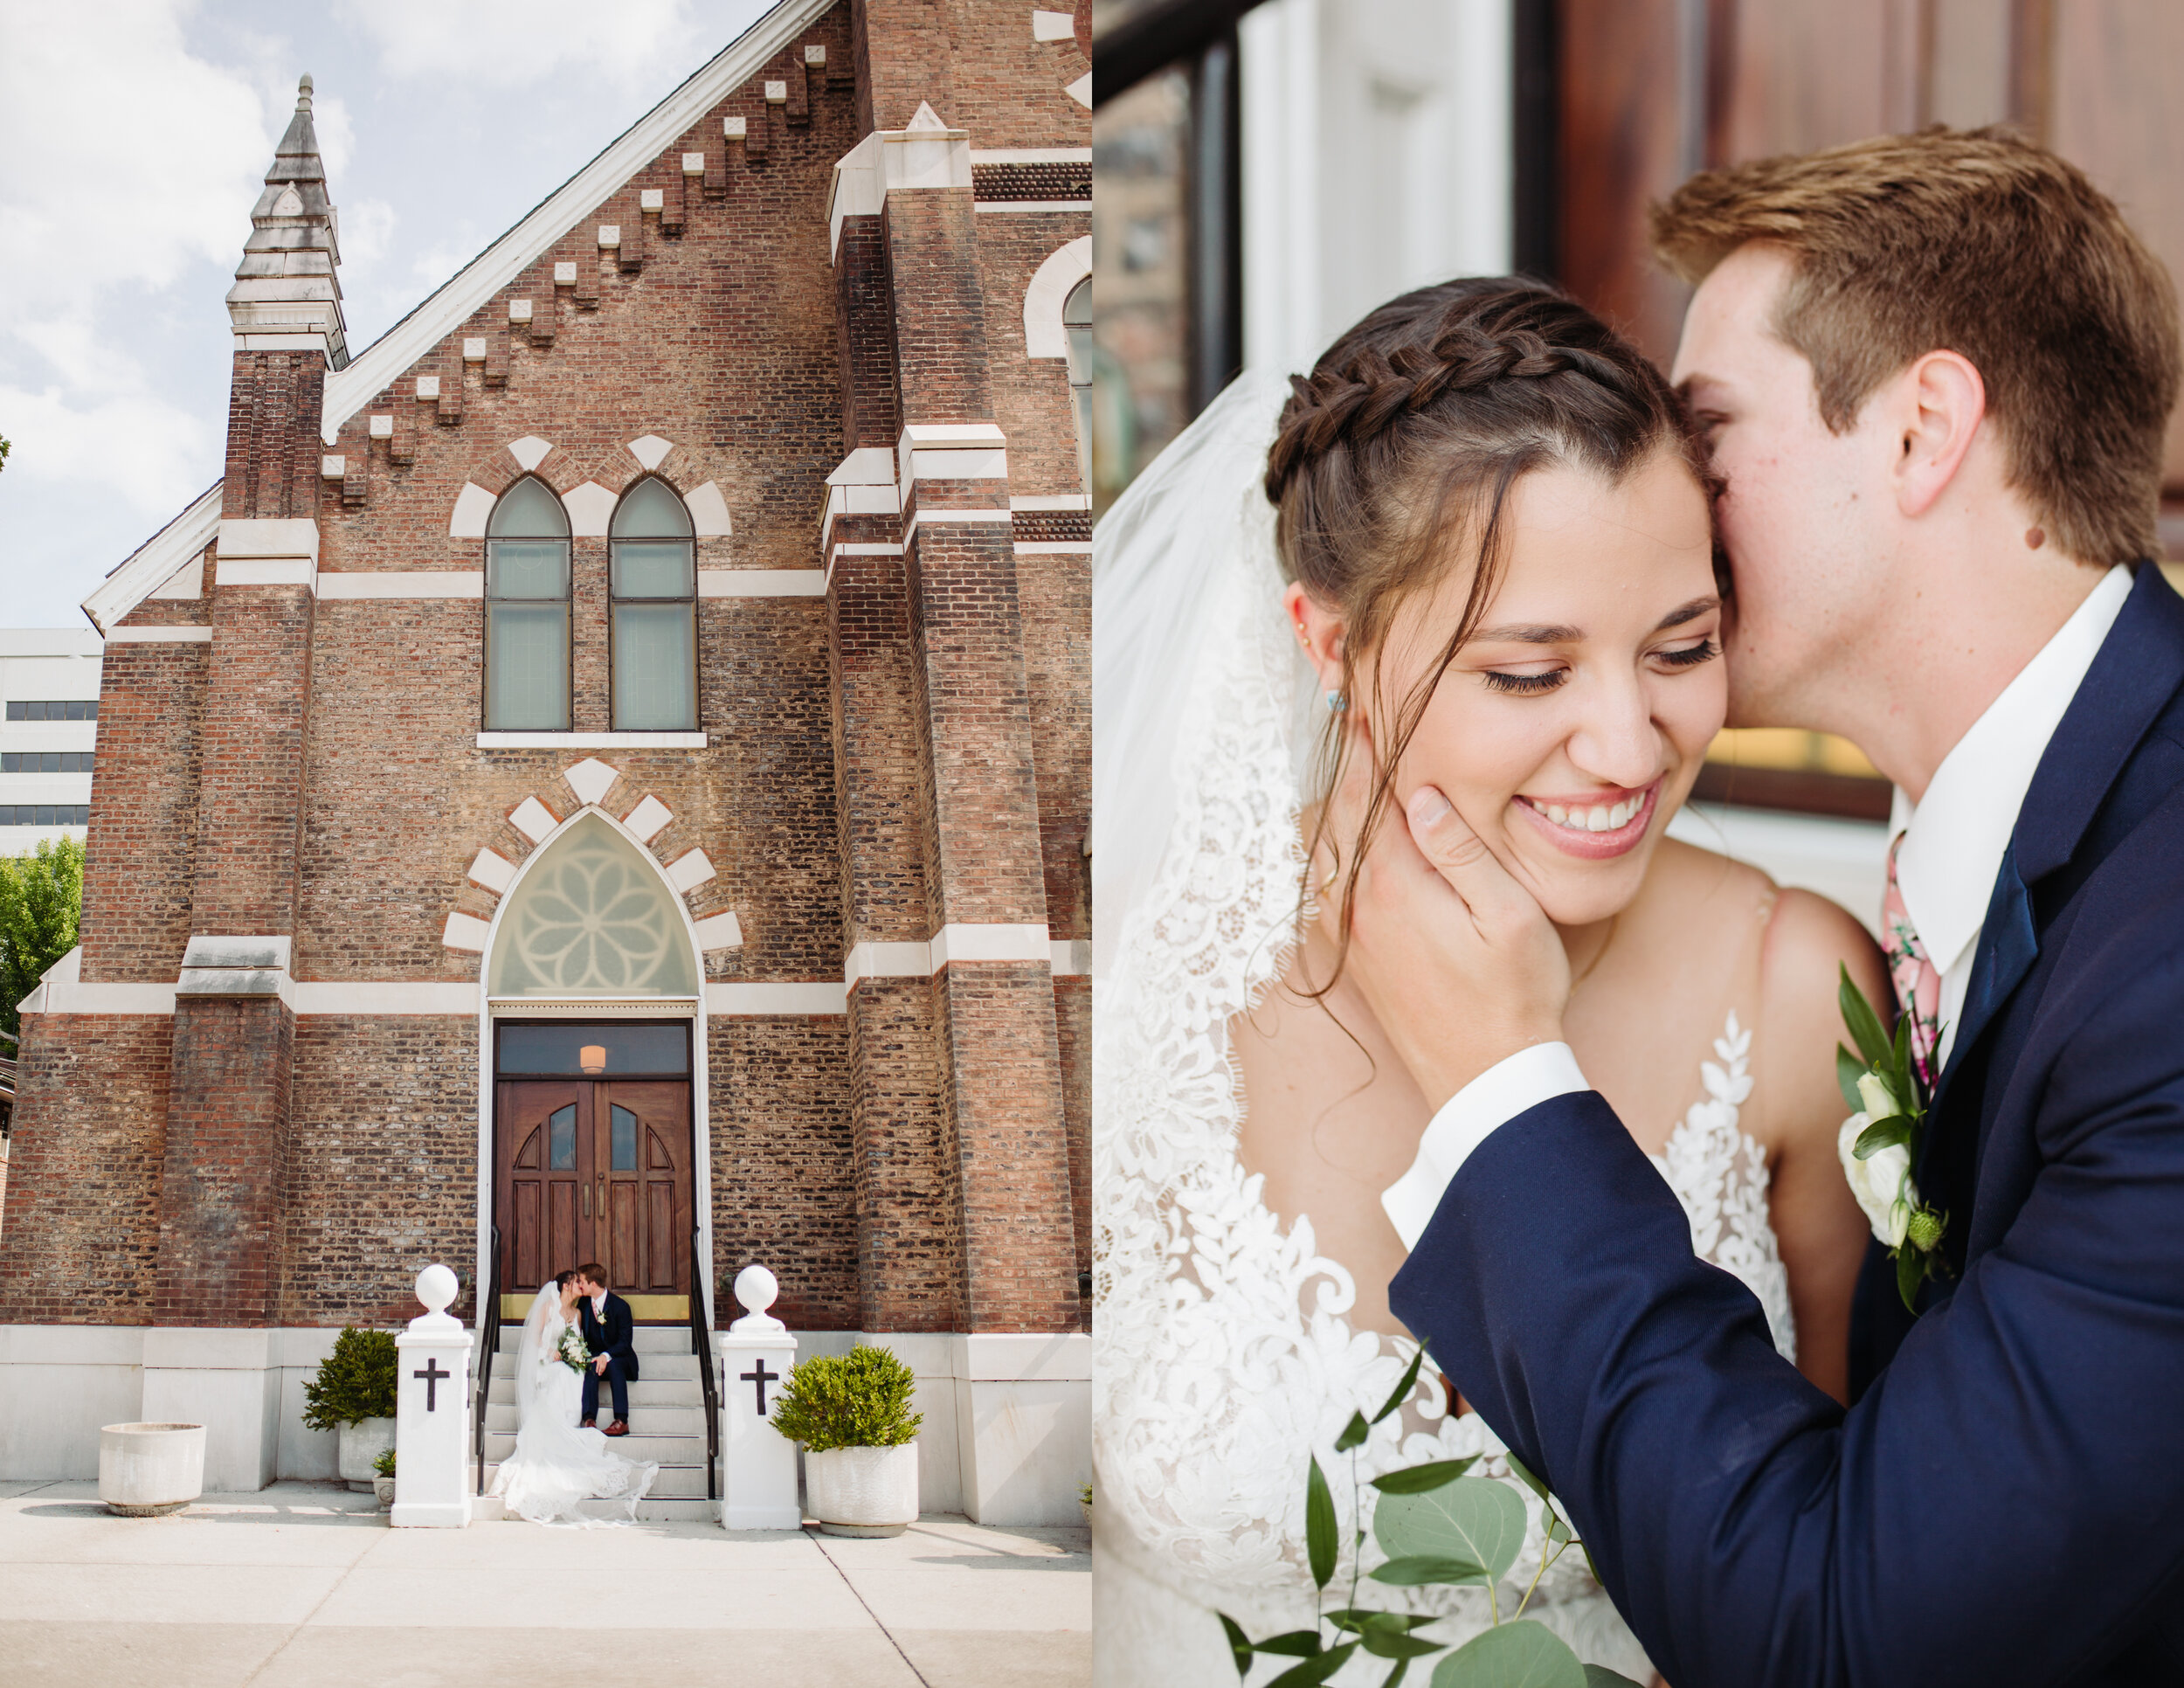 Bridal portraits outside of a church before an elegant indoor summer wedding in Tennessee